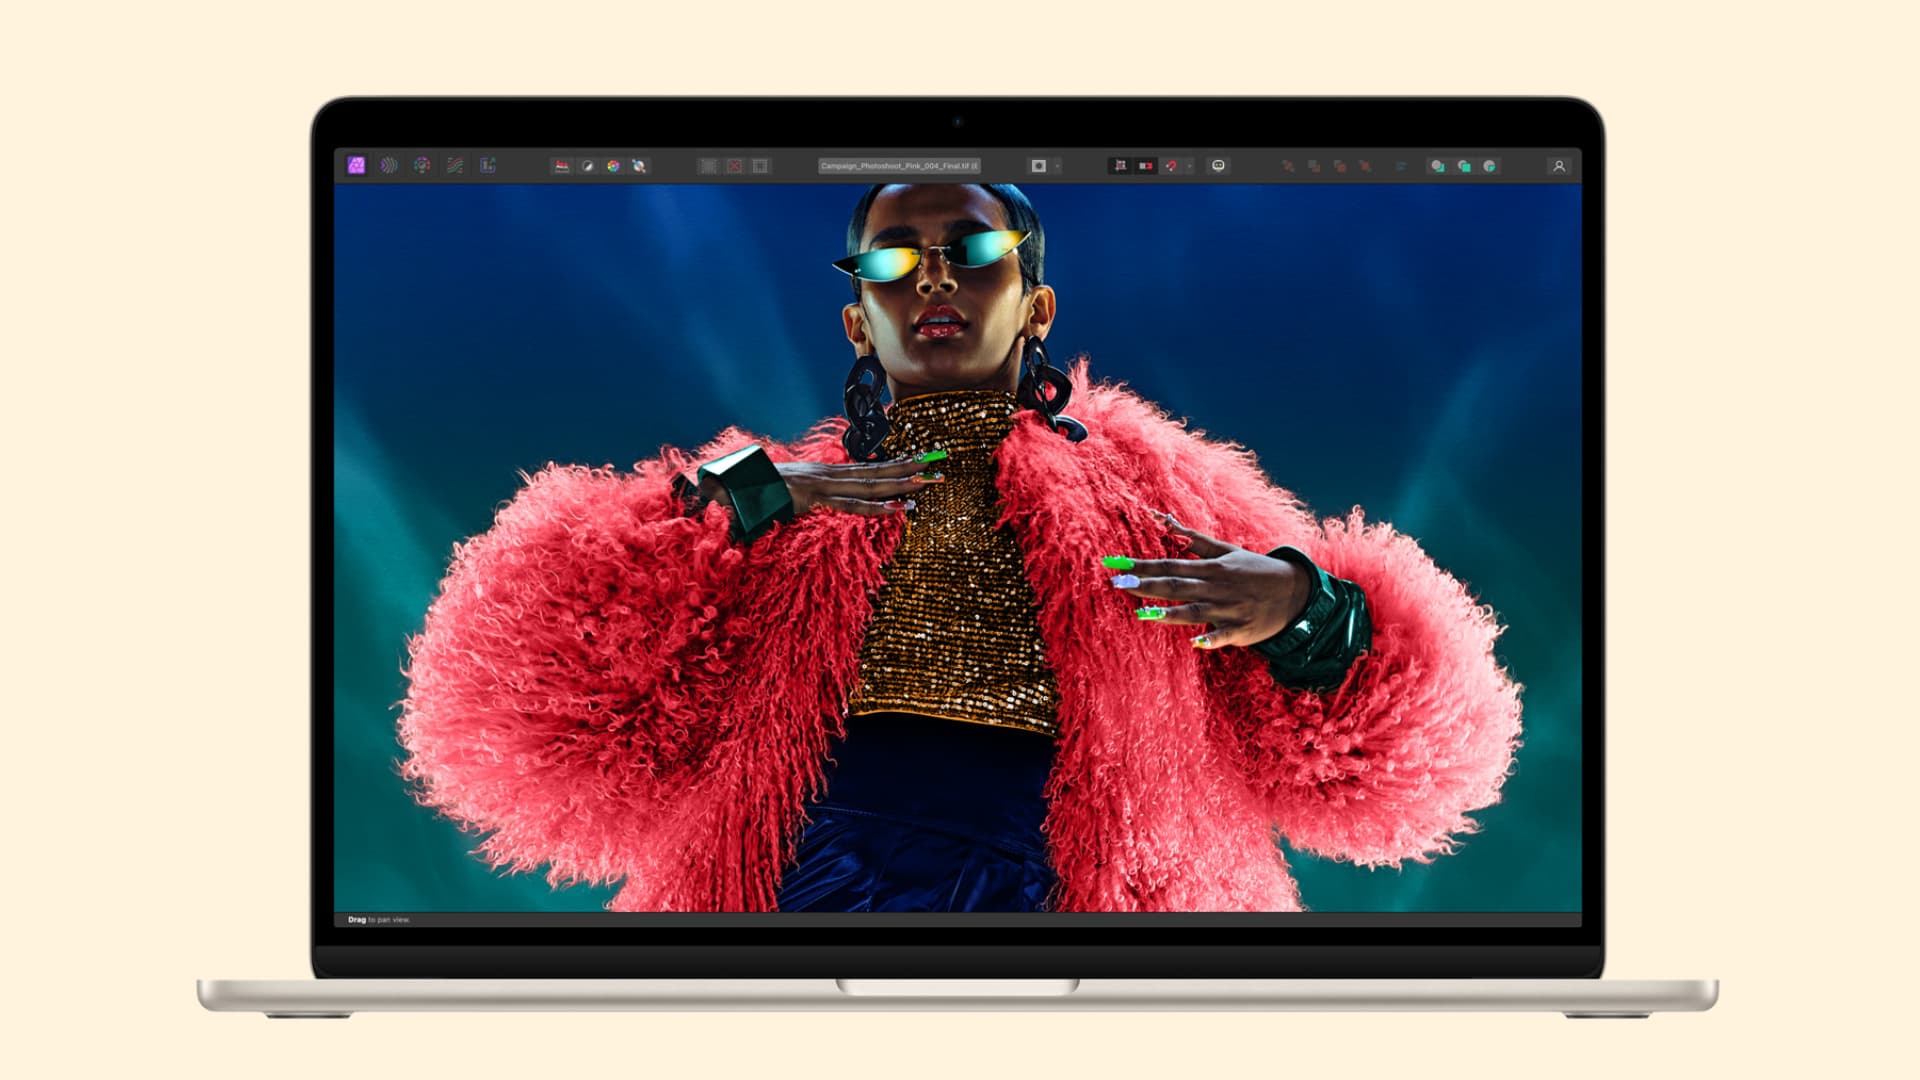 MacBook with a female model on the screen